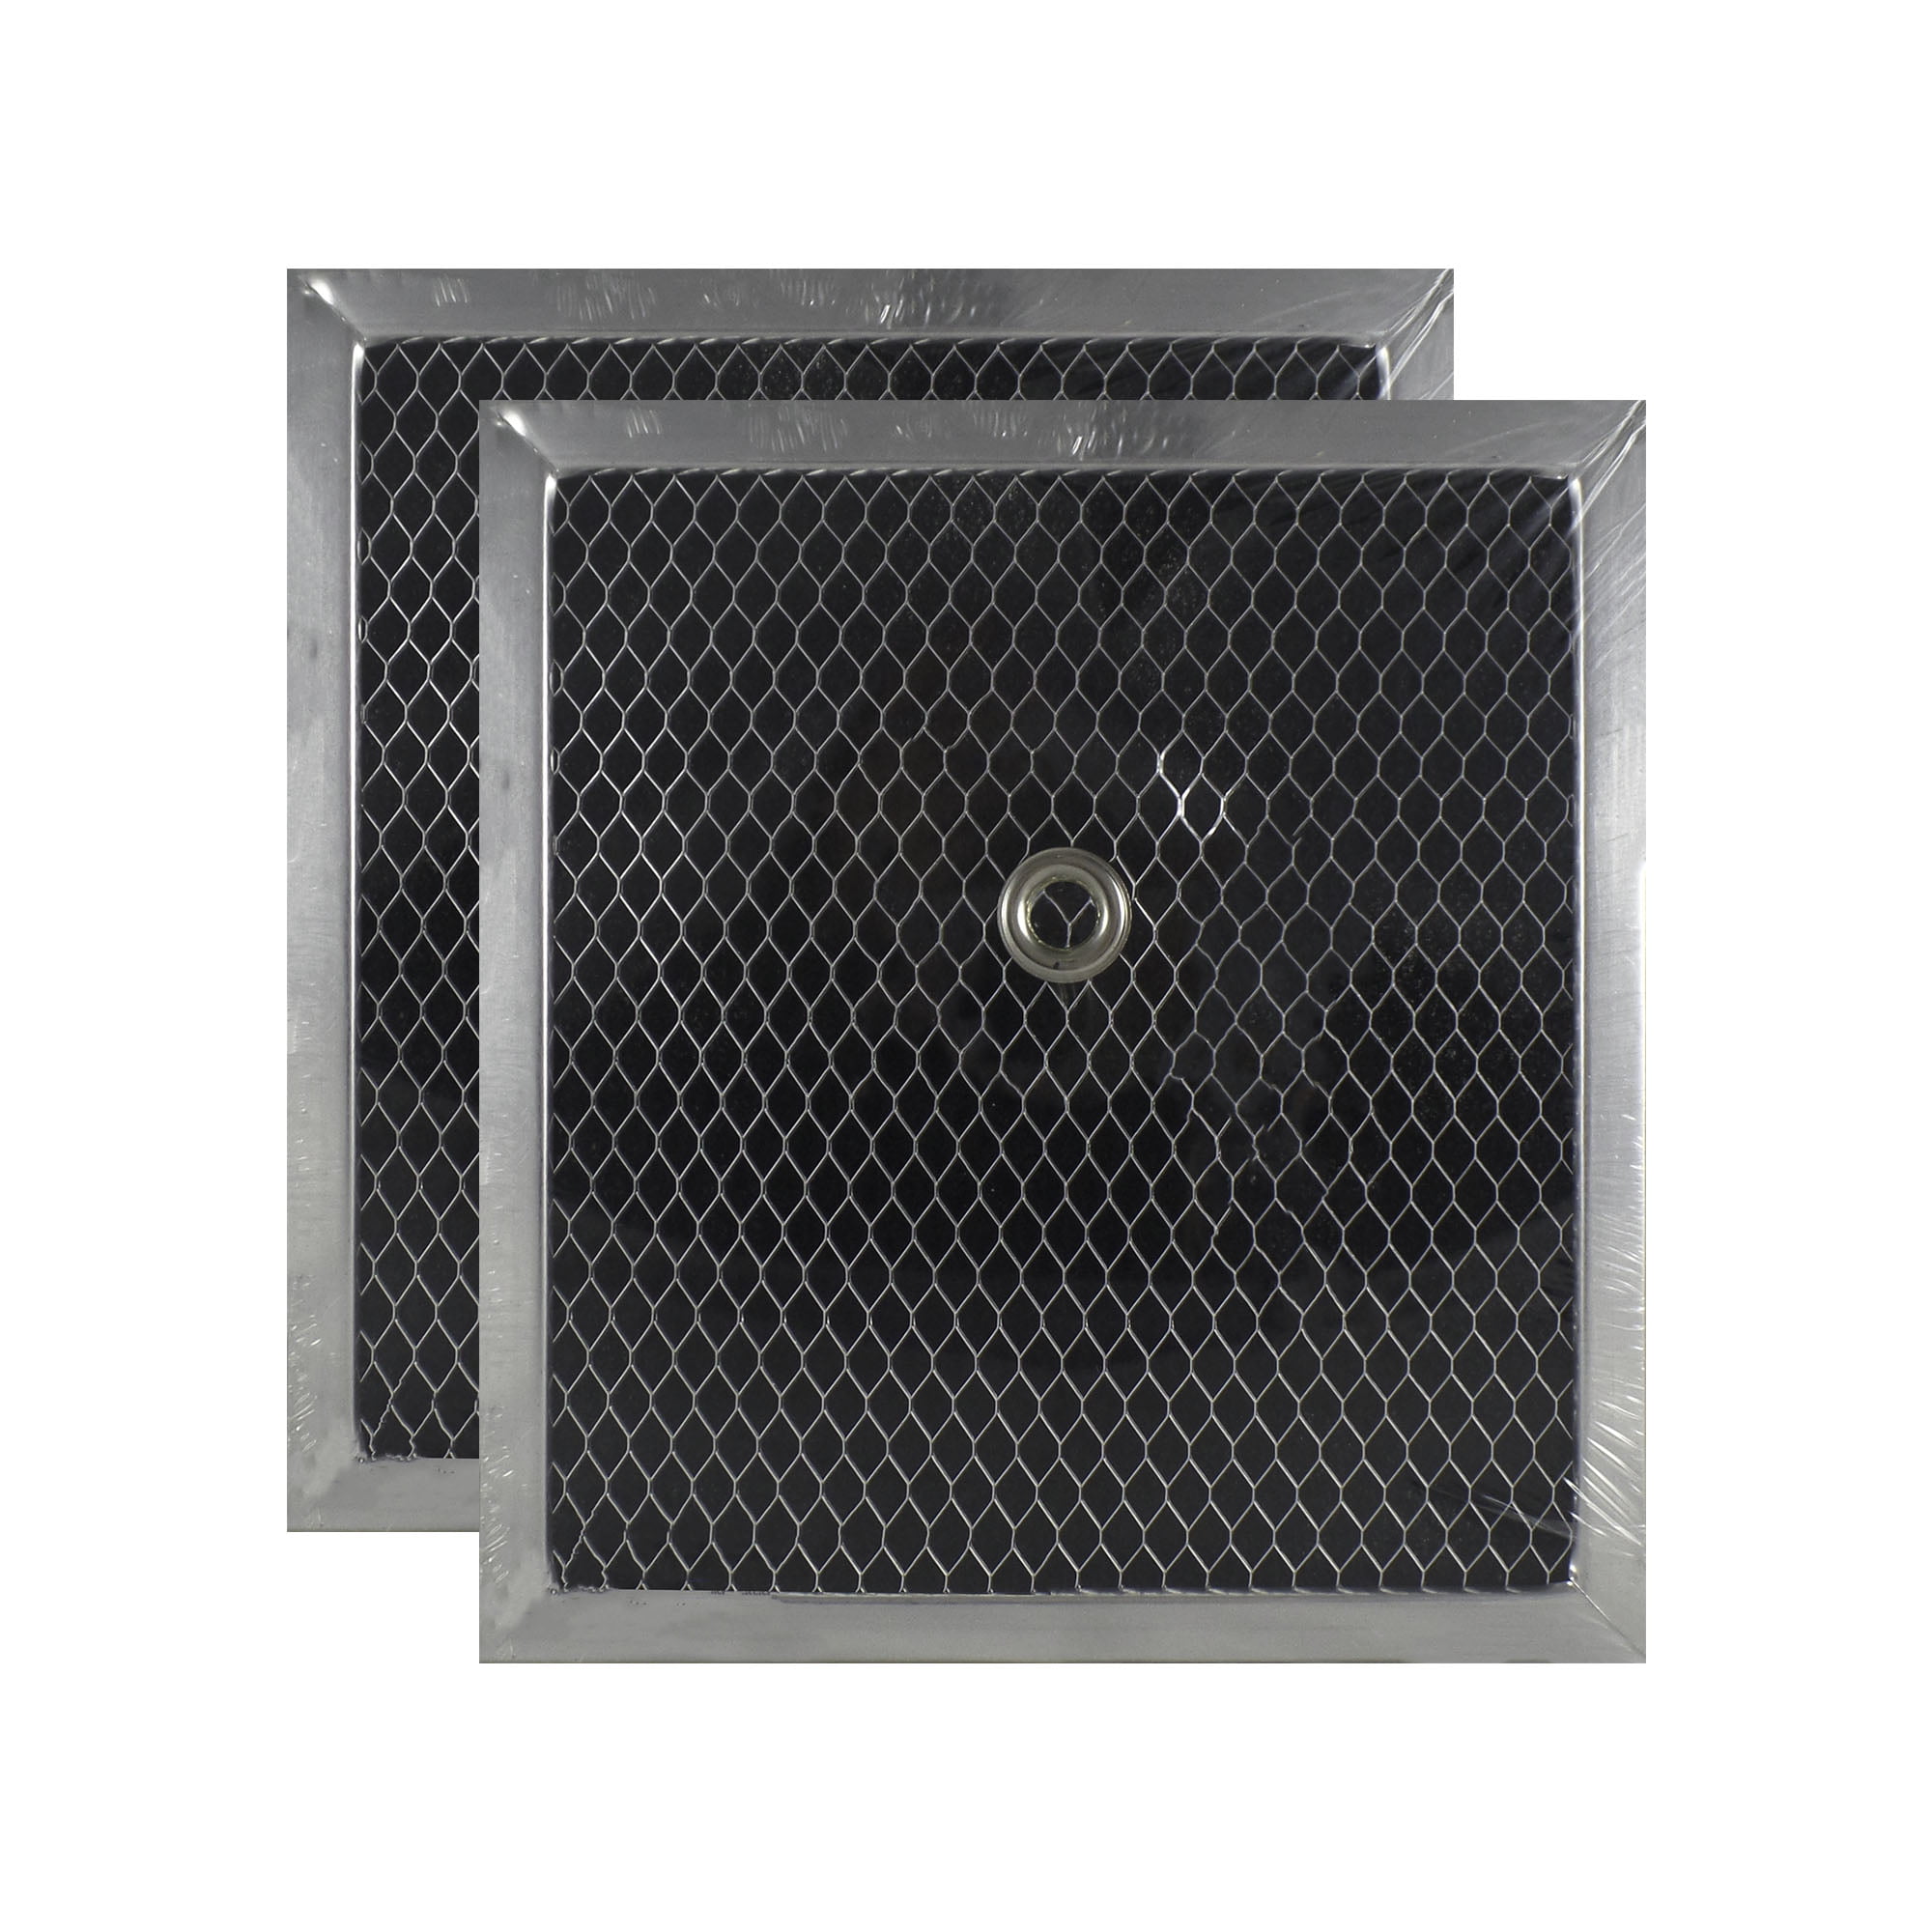 2Pack Air Filter Factory AFF150CH 7 x 71/2 x 3/8 Bathroom Vent Charcoal Carbon Filters